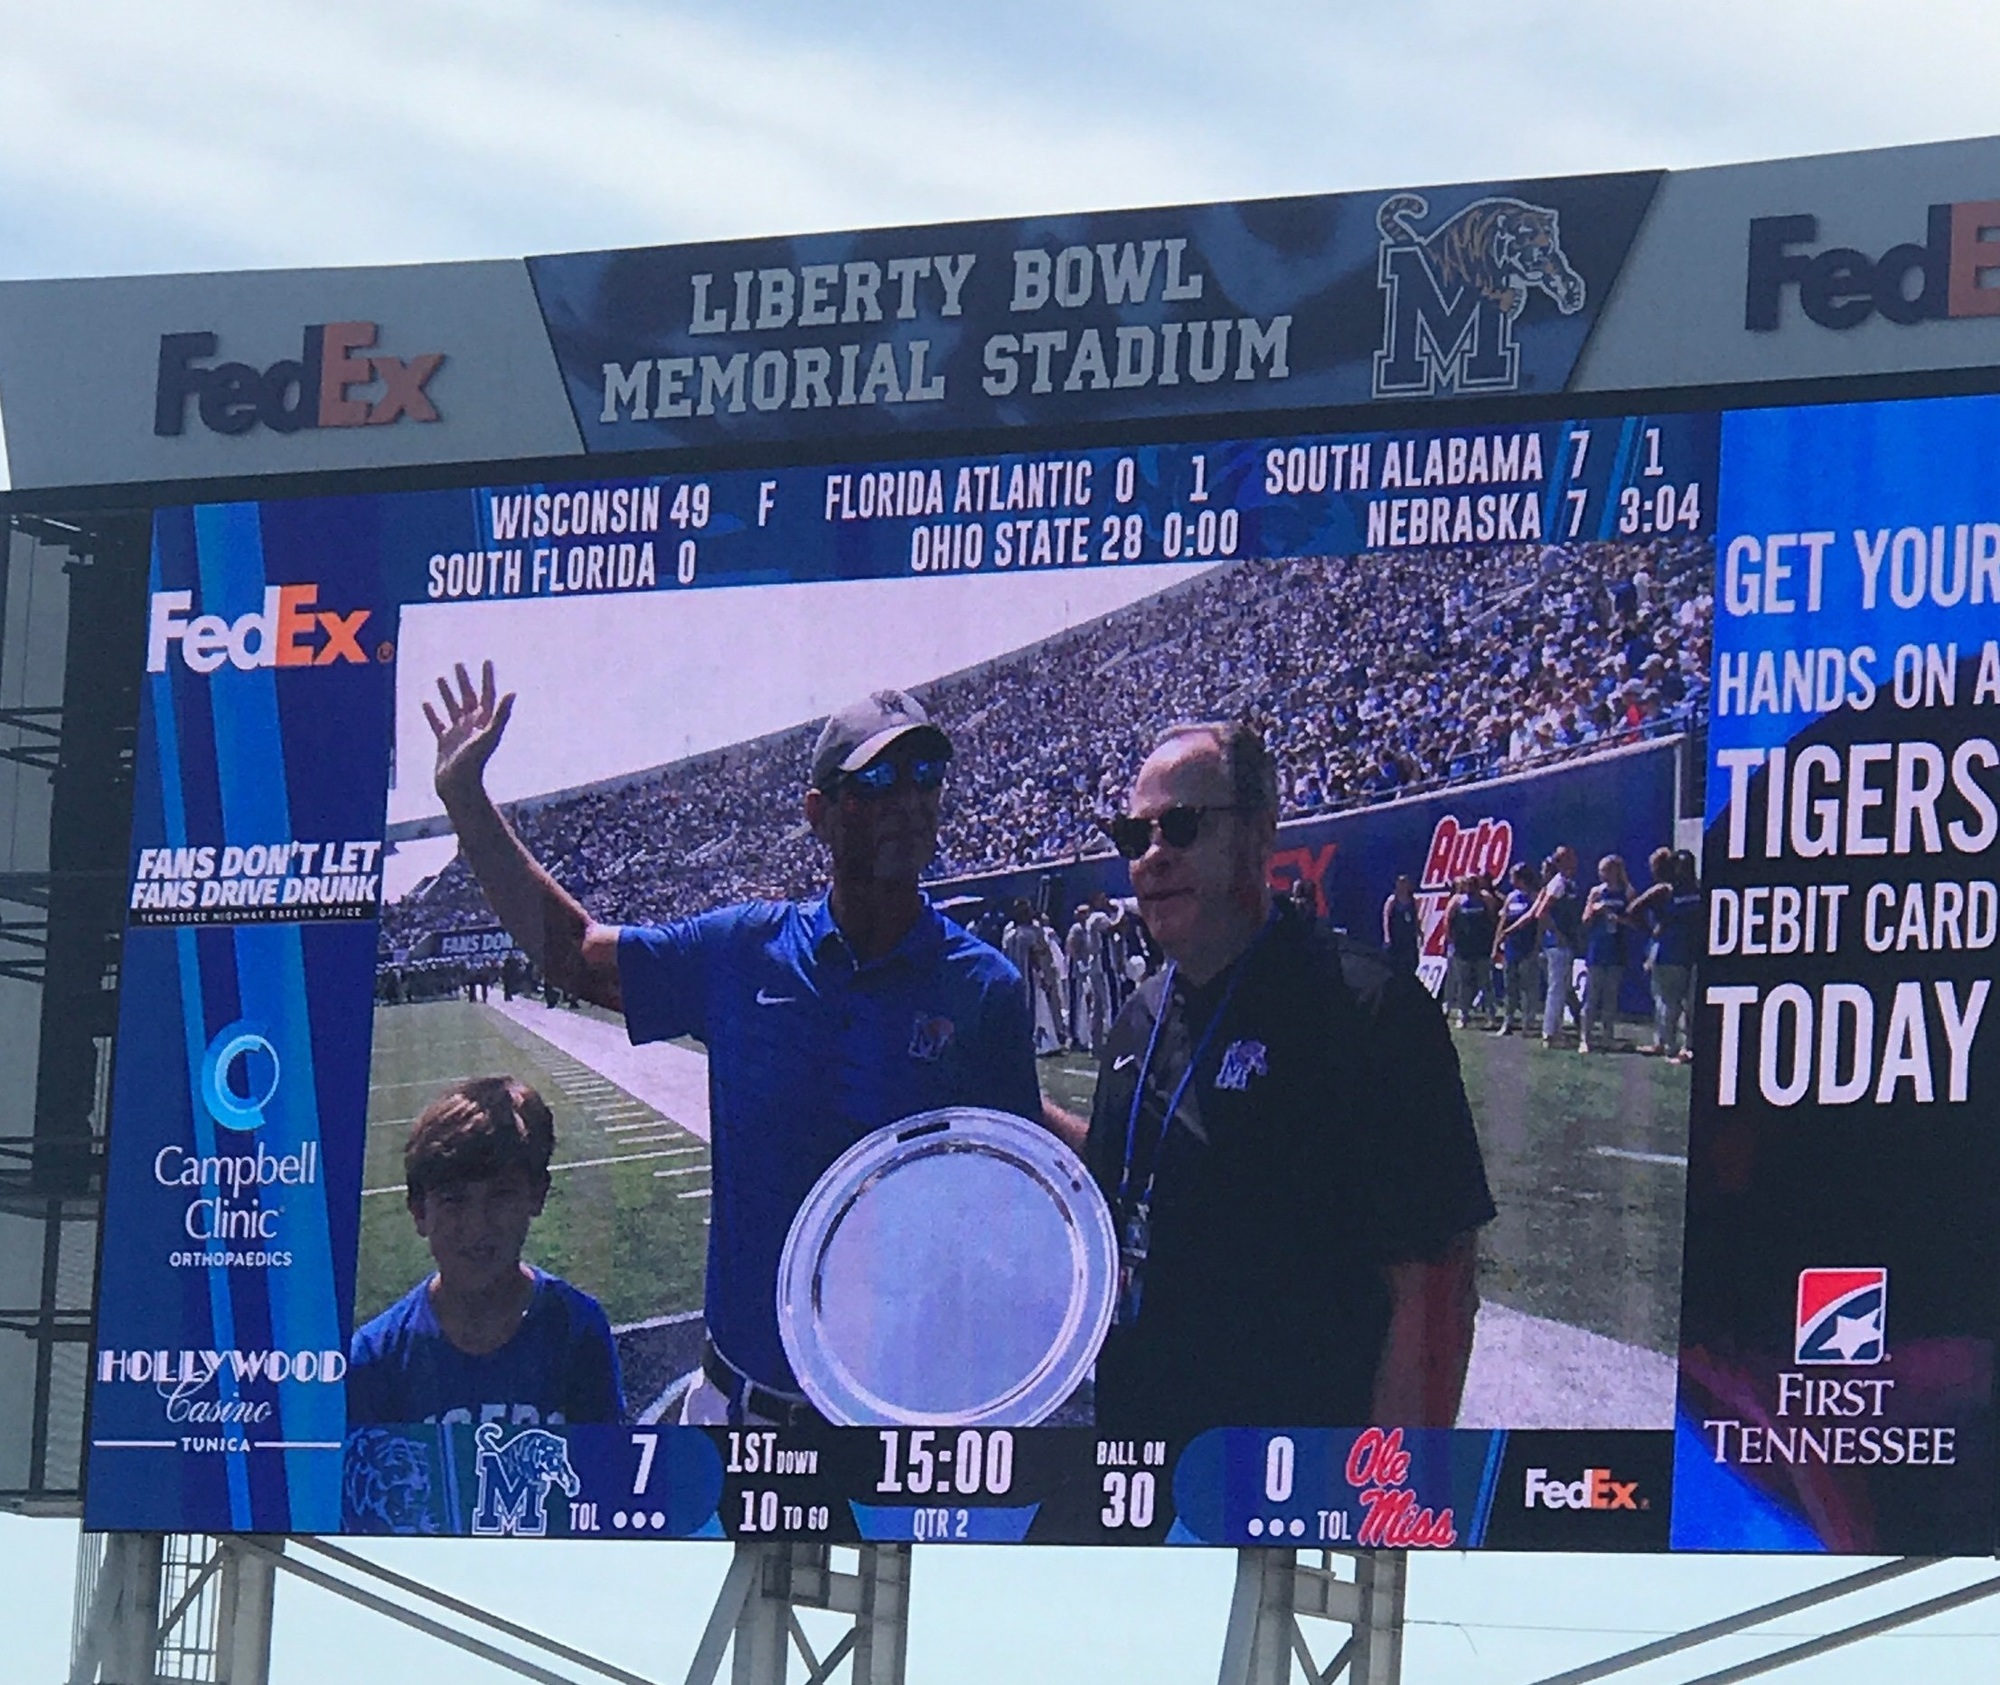 Reid Hedgepeth at the Liberty Bowl